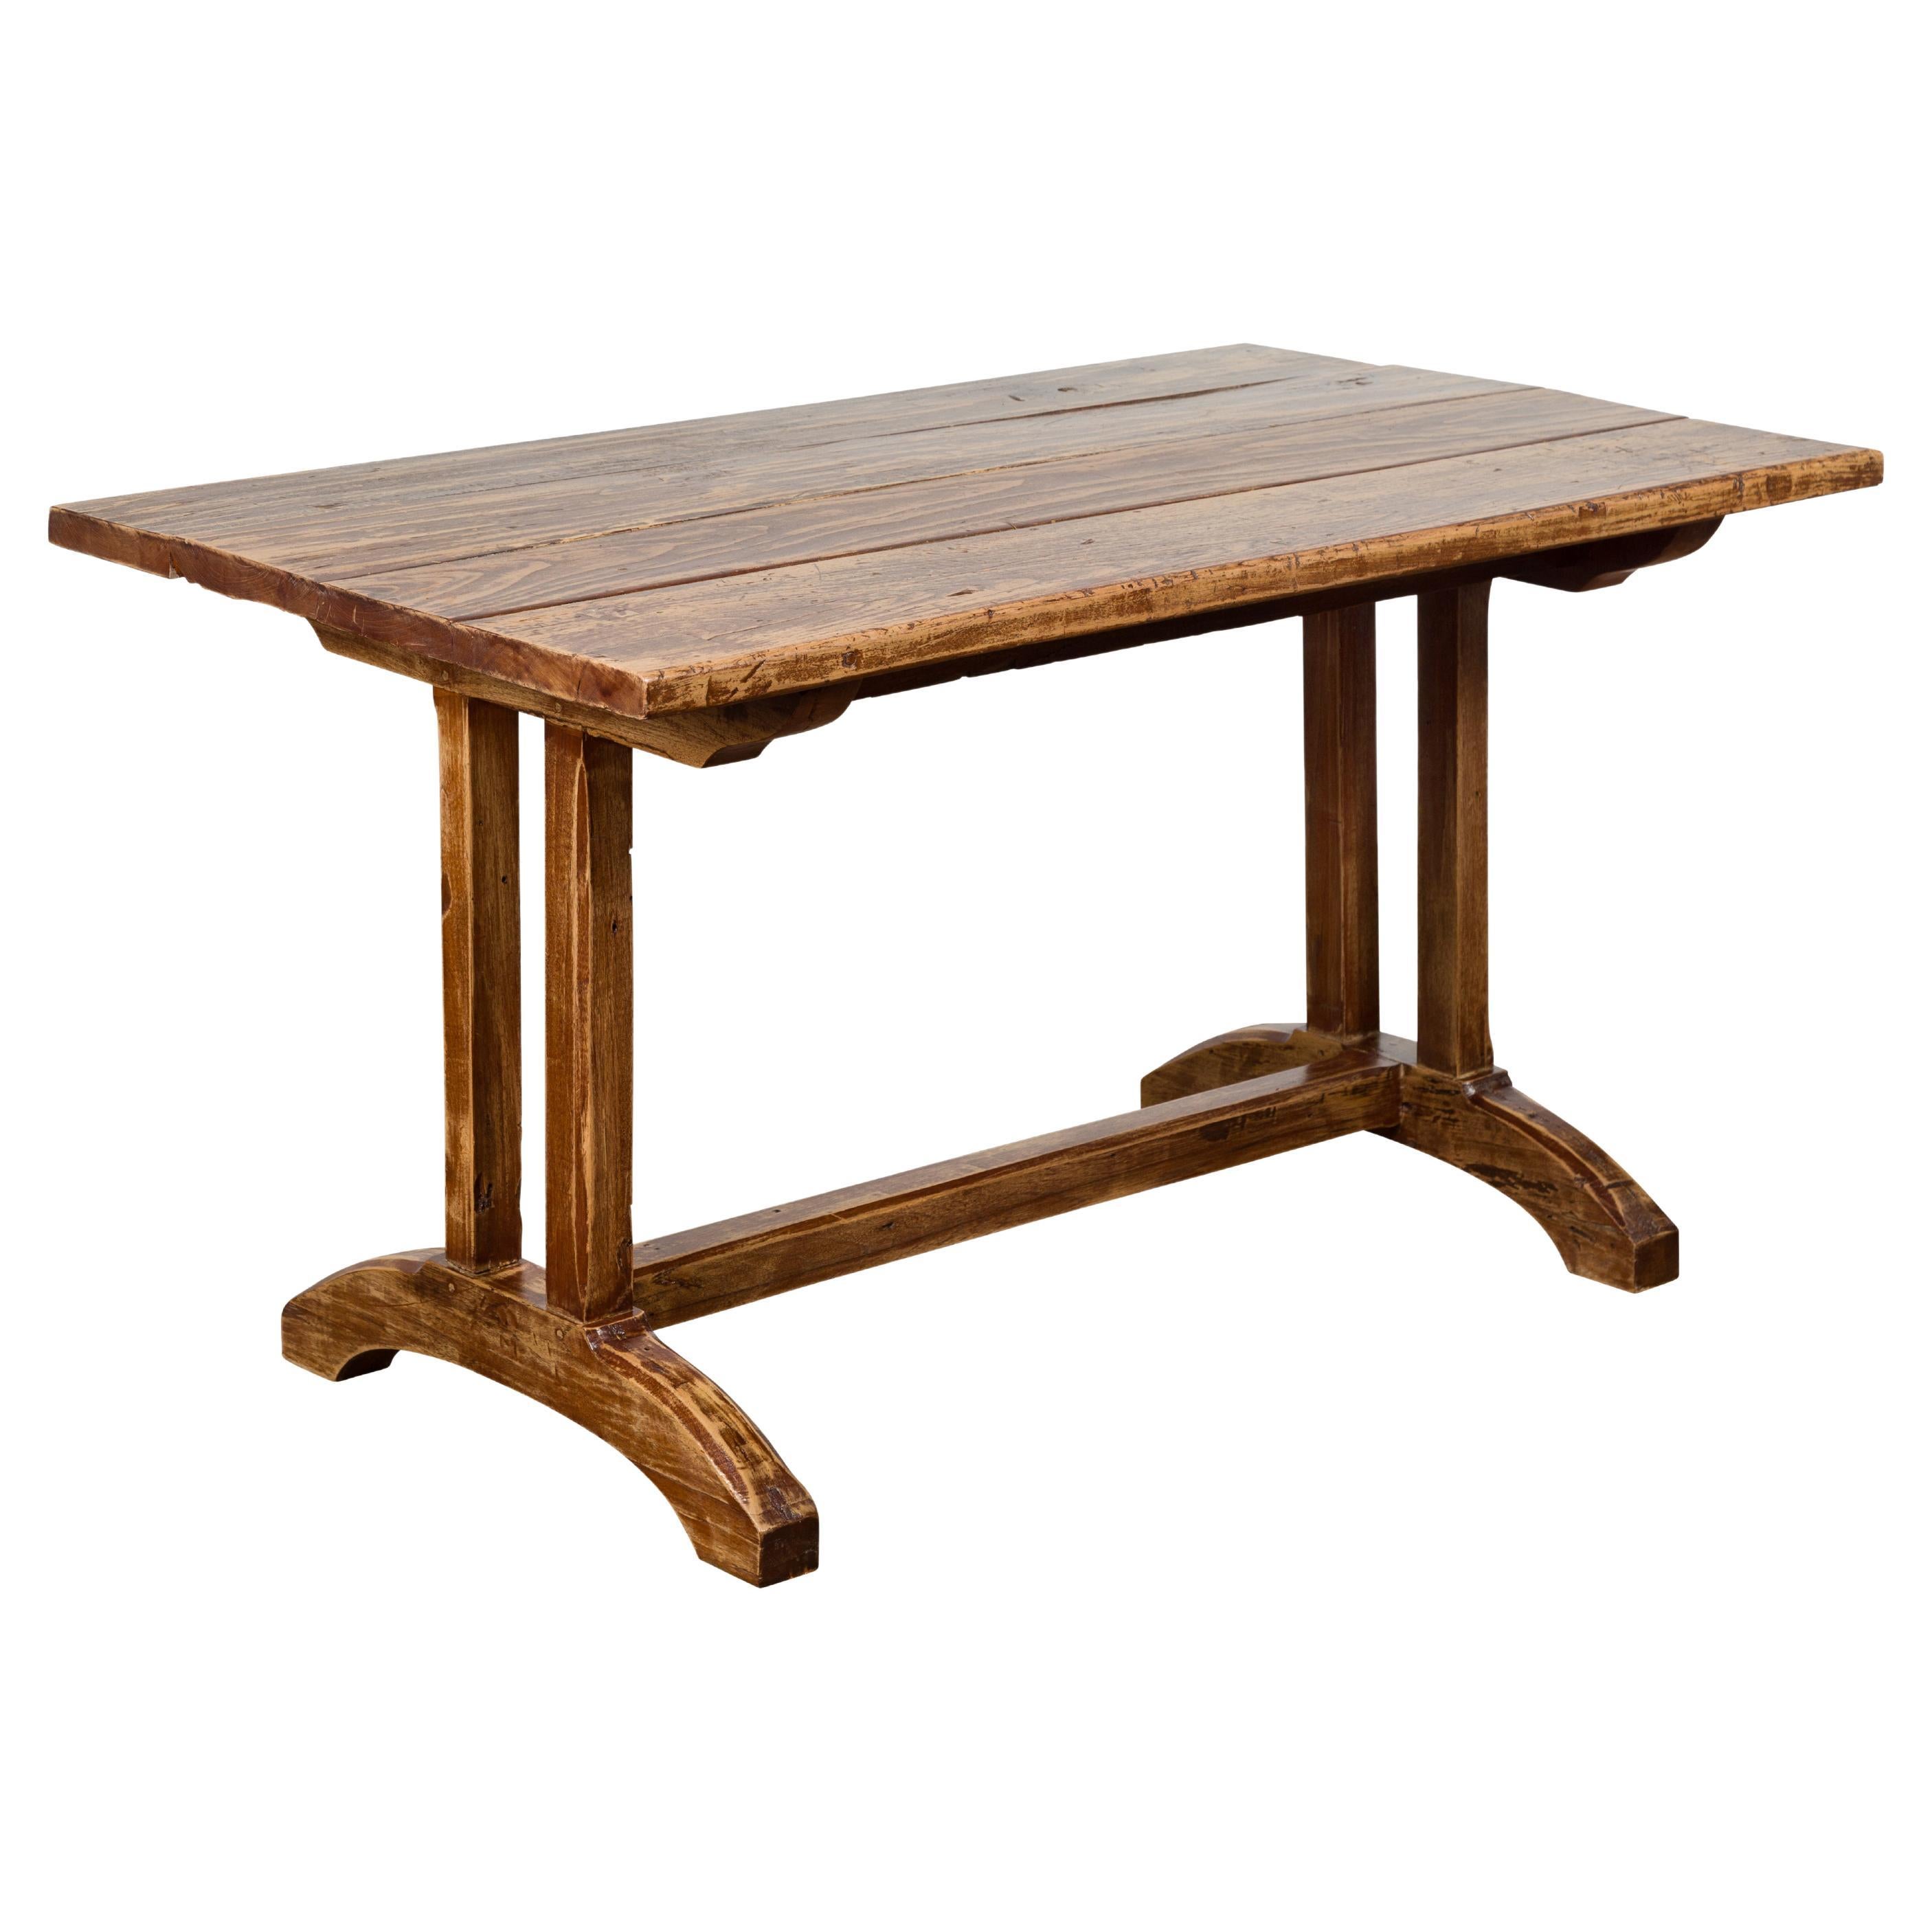 19th Century Country Farmhouse Table with Trestle Base and Distressed Finish For Sale